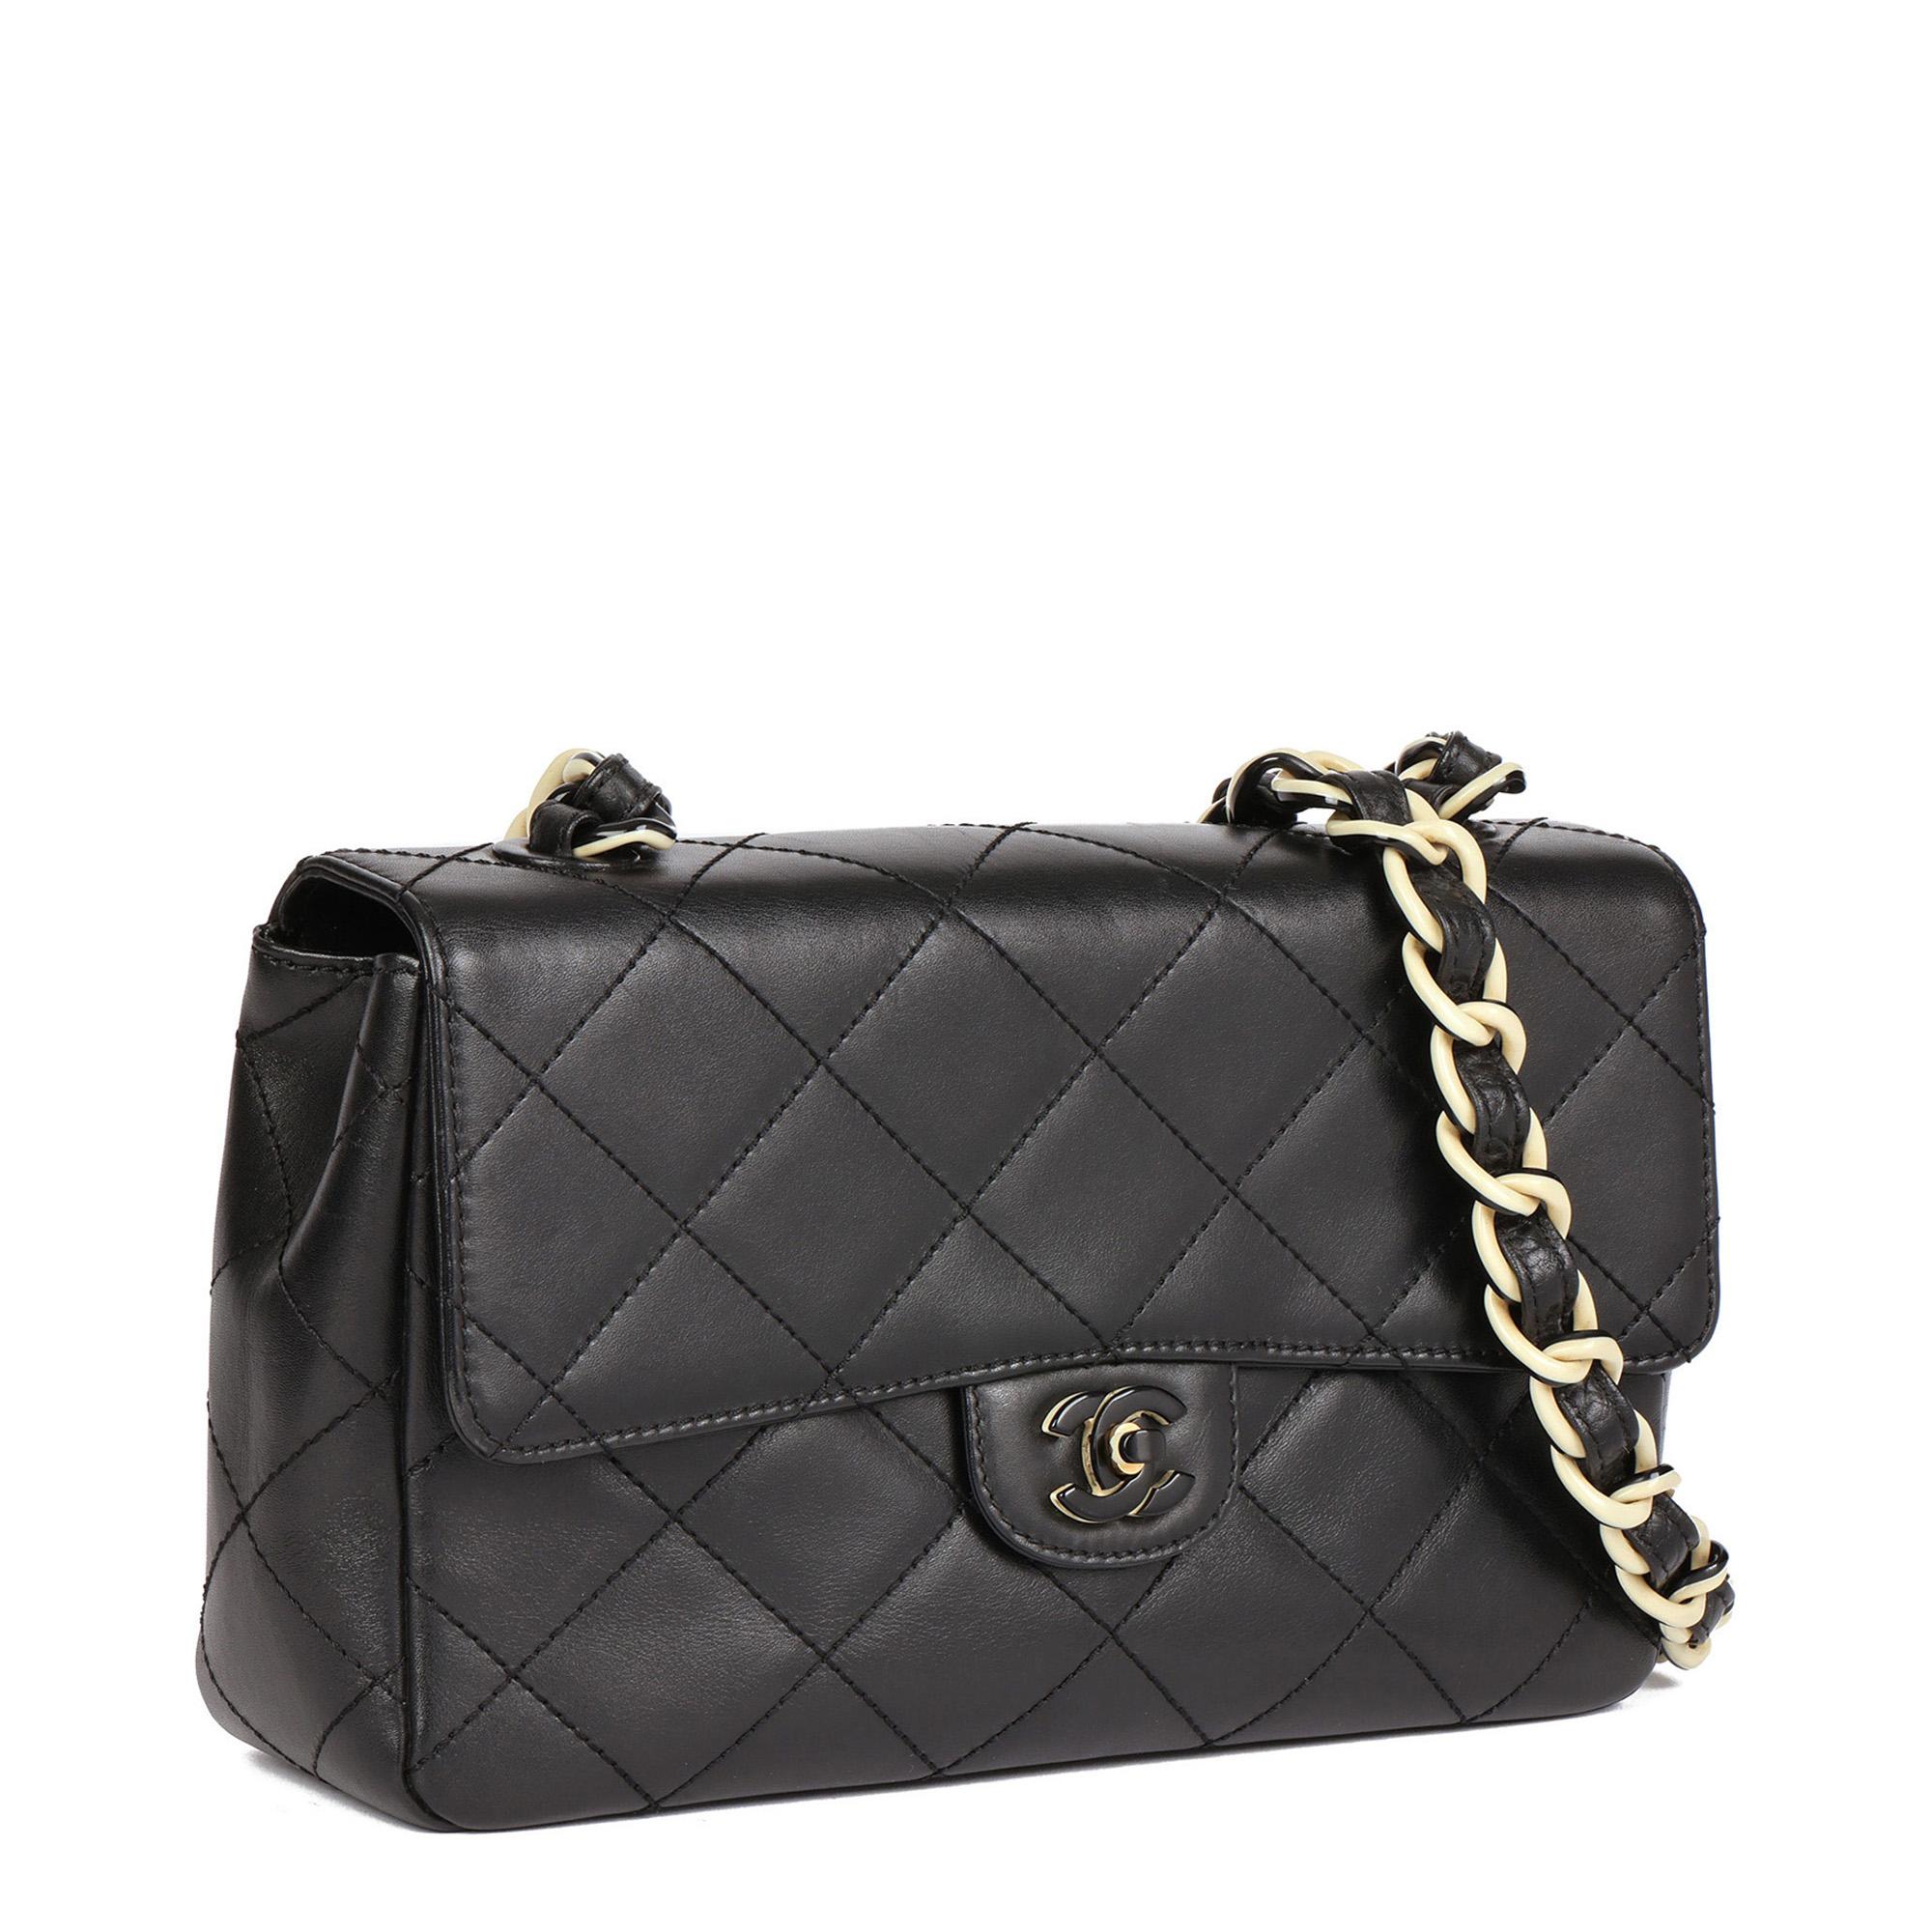 CHANEL
Black Quilted Lambskin Vintage Medium Classic Single Flap Bag

Serial Number: 6497137
Age (Circa): 2000
Accompanied By: Chanel Dust Bag, Care Booklet
Authenticity Details: Serial Sticker (Made in Italy)
Gender: Ladies
Type: Shoulder,